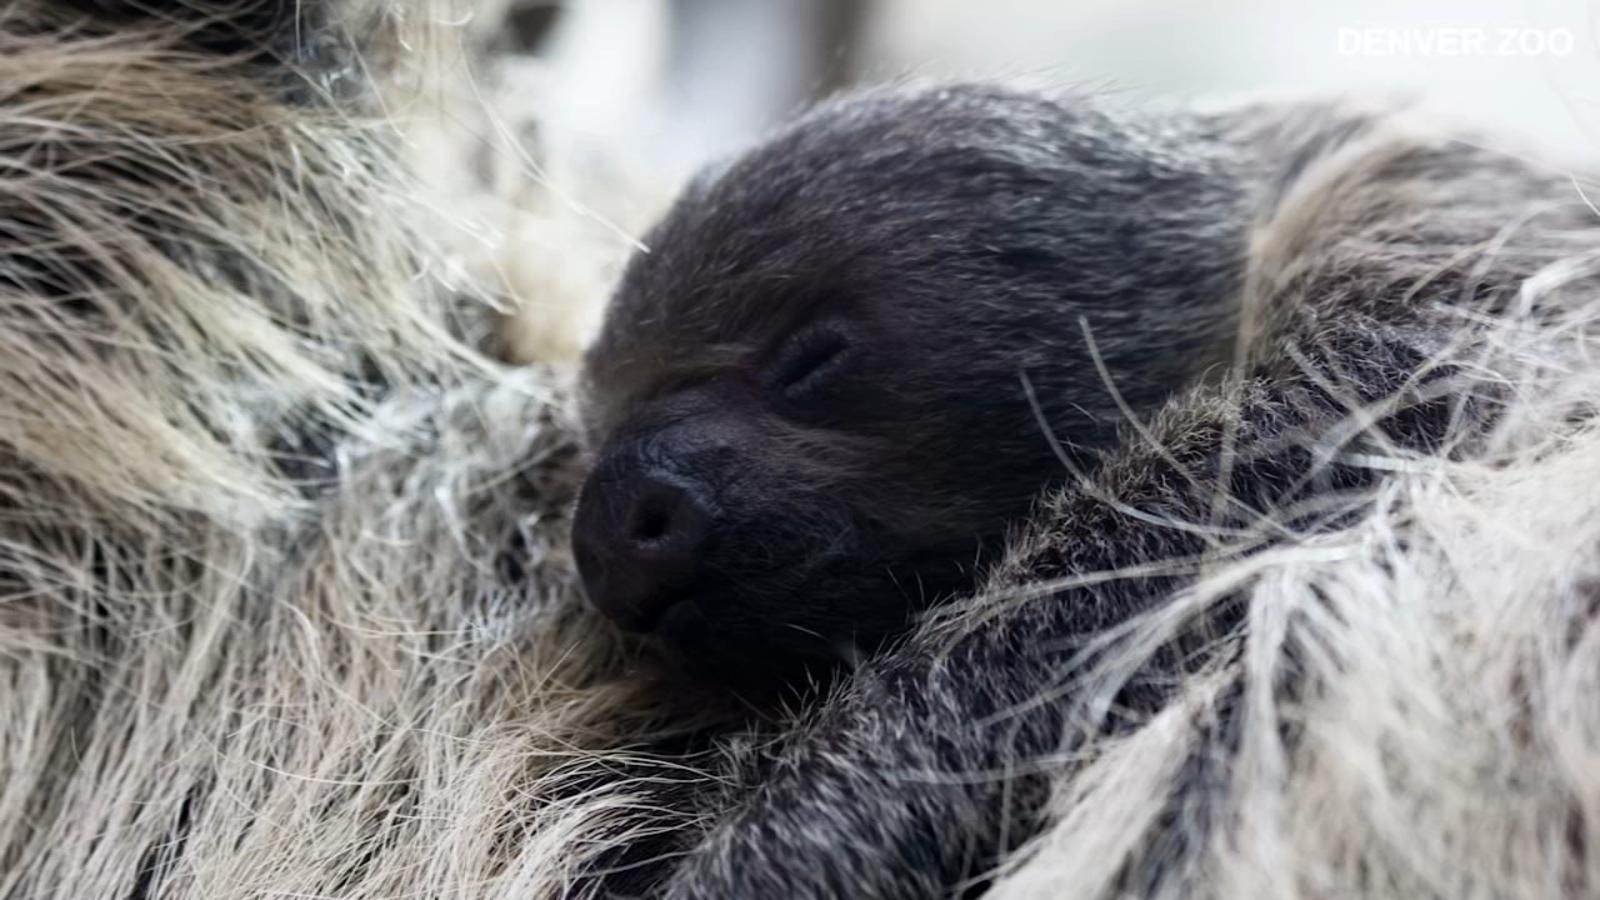 Denver Zoo welcomes baby sloth